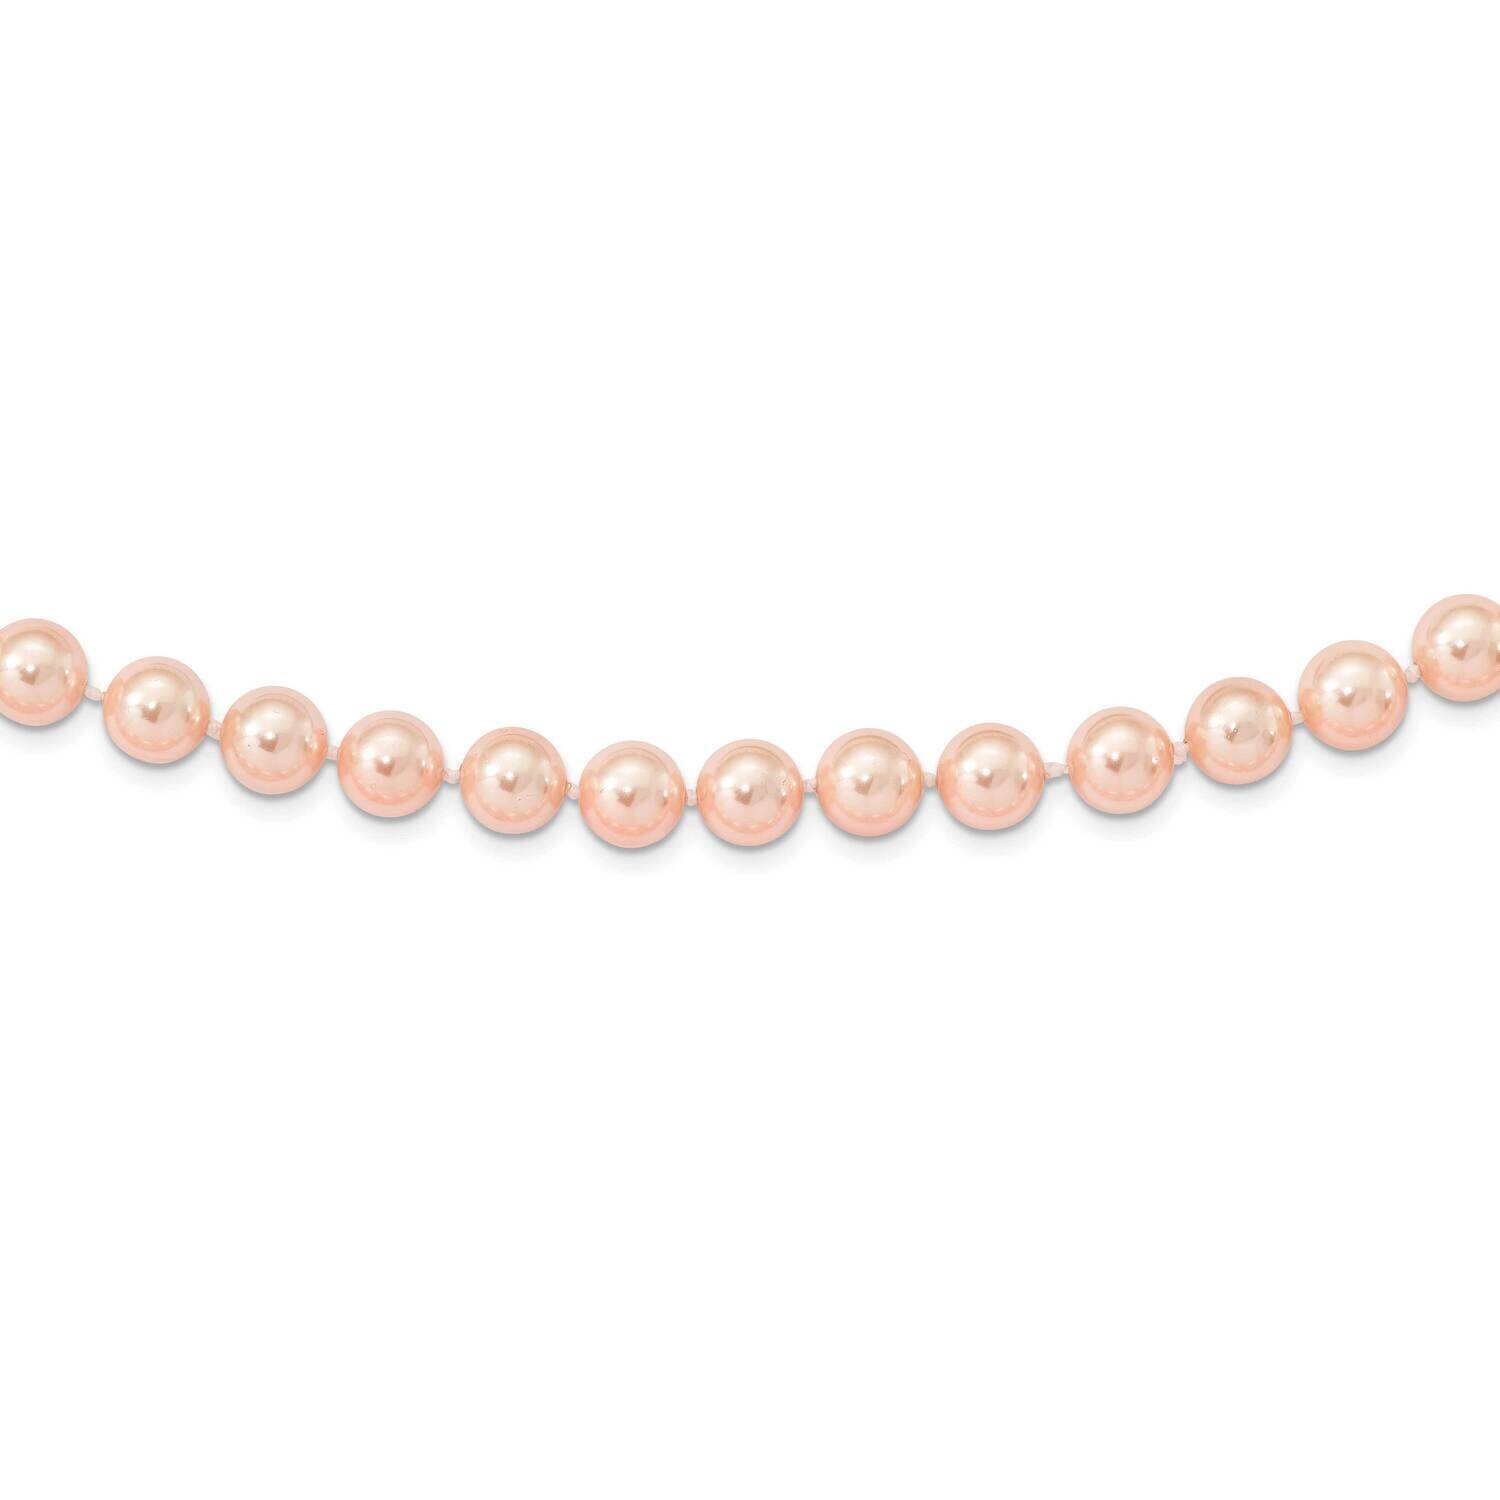 Majestik 10-11mm Pink Imitat Shell Pearl Necklace Sterling Silver Rhodium-plated QMJN10P-24